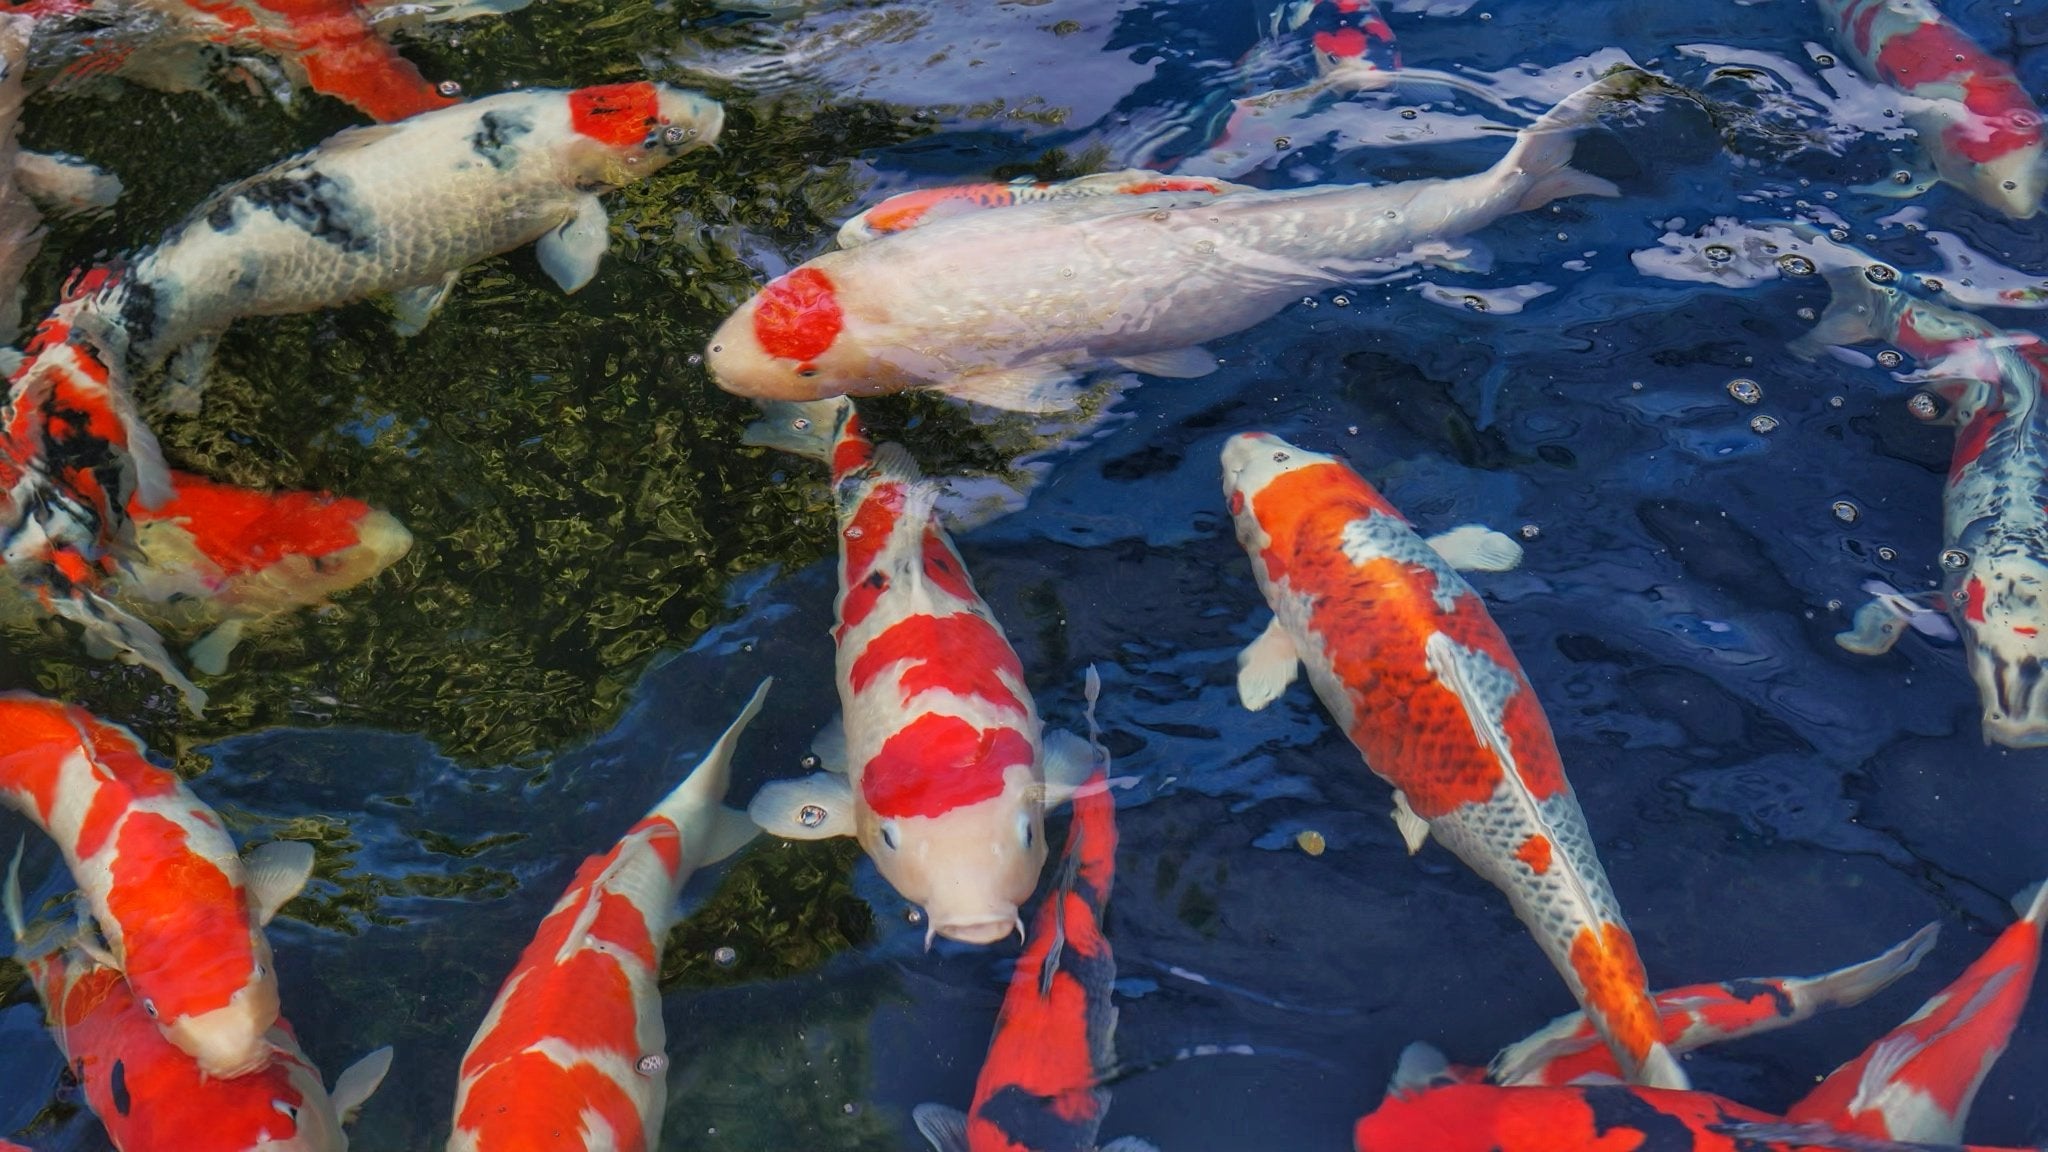 Local Koi Fish for sale. We import championship koi fish directly from Japan. Shop beautiful Koi fish for sale online.